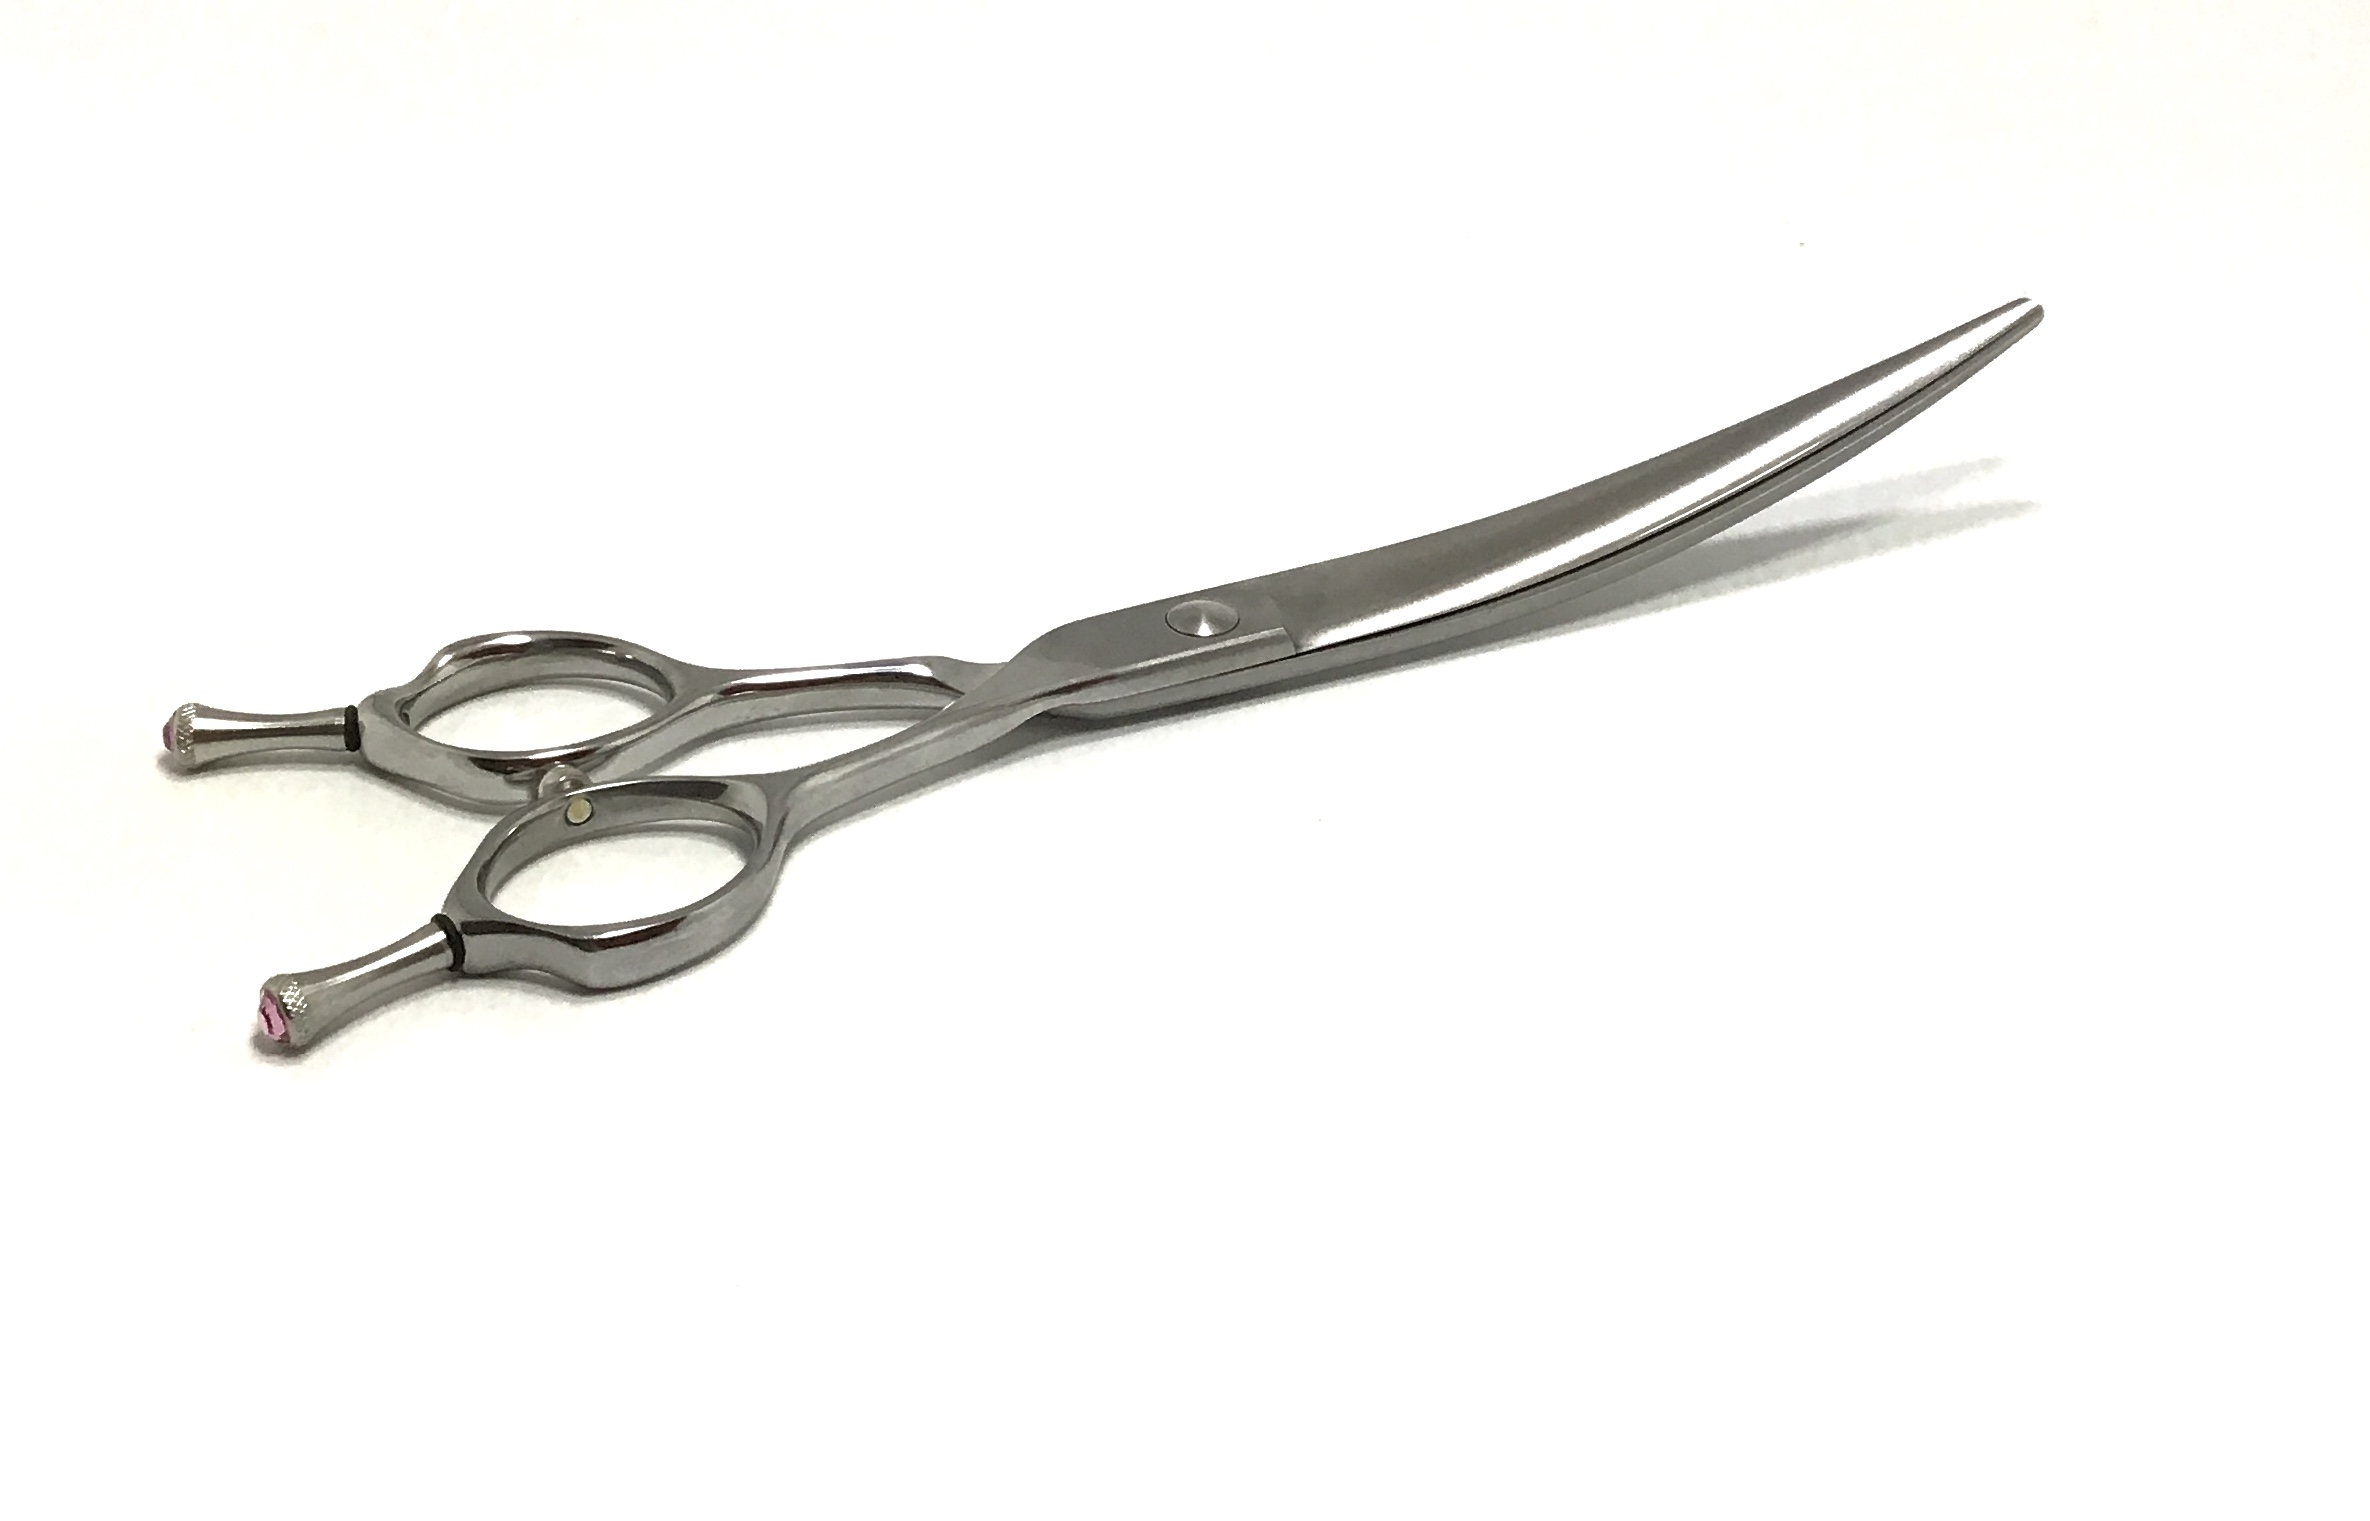 Global Scissors Reese 7 inch Asian Fusion Extreme Curved Scissor